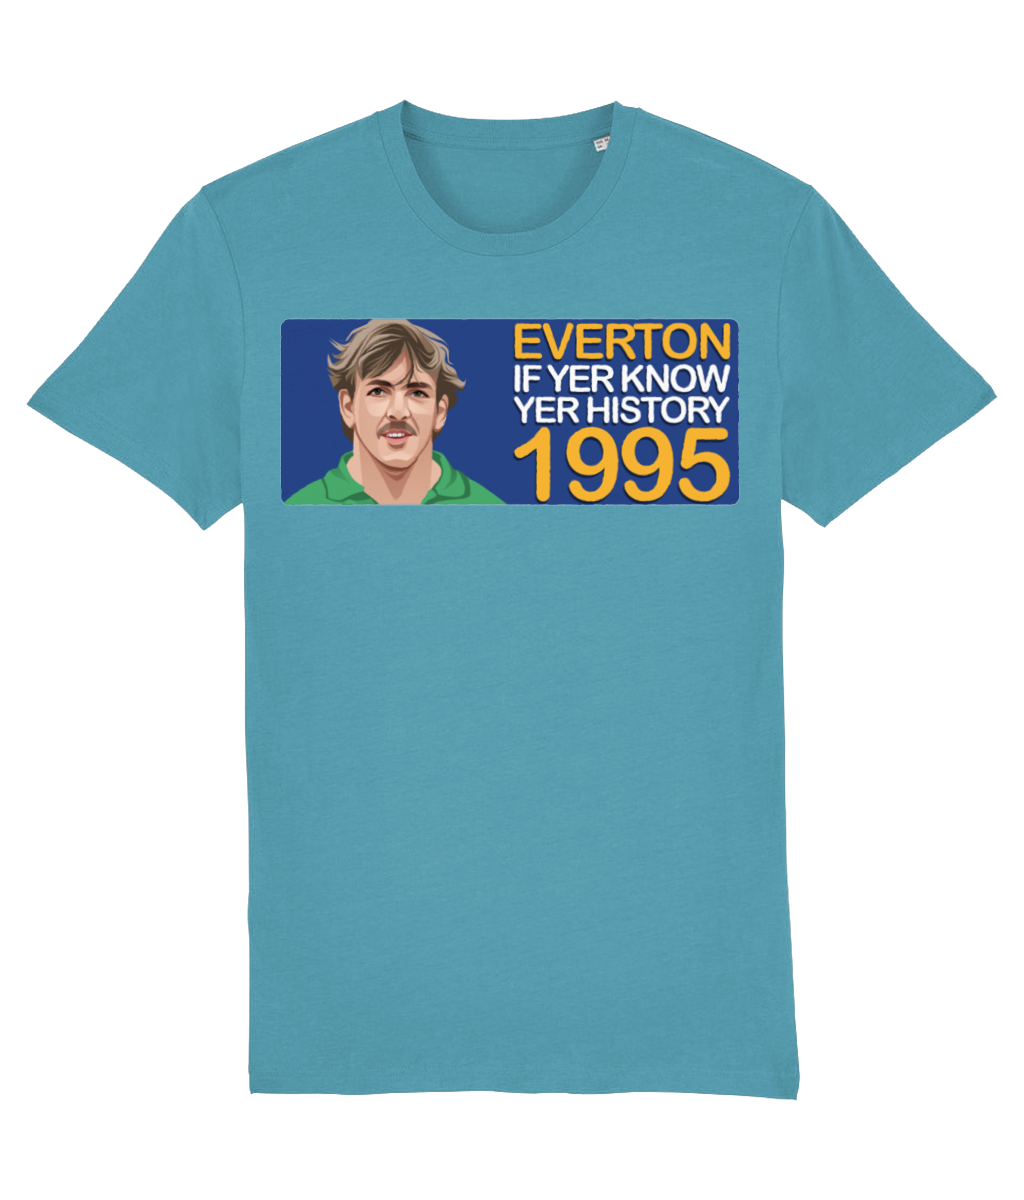 Everton 1995 Neville Southall If Yer Know Yer History Unisex T-Shirt Stanley/Stella Retrotext Atlantic Blue XX-Small 